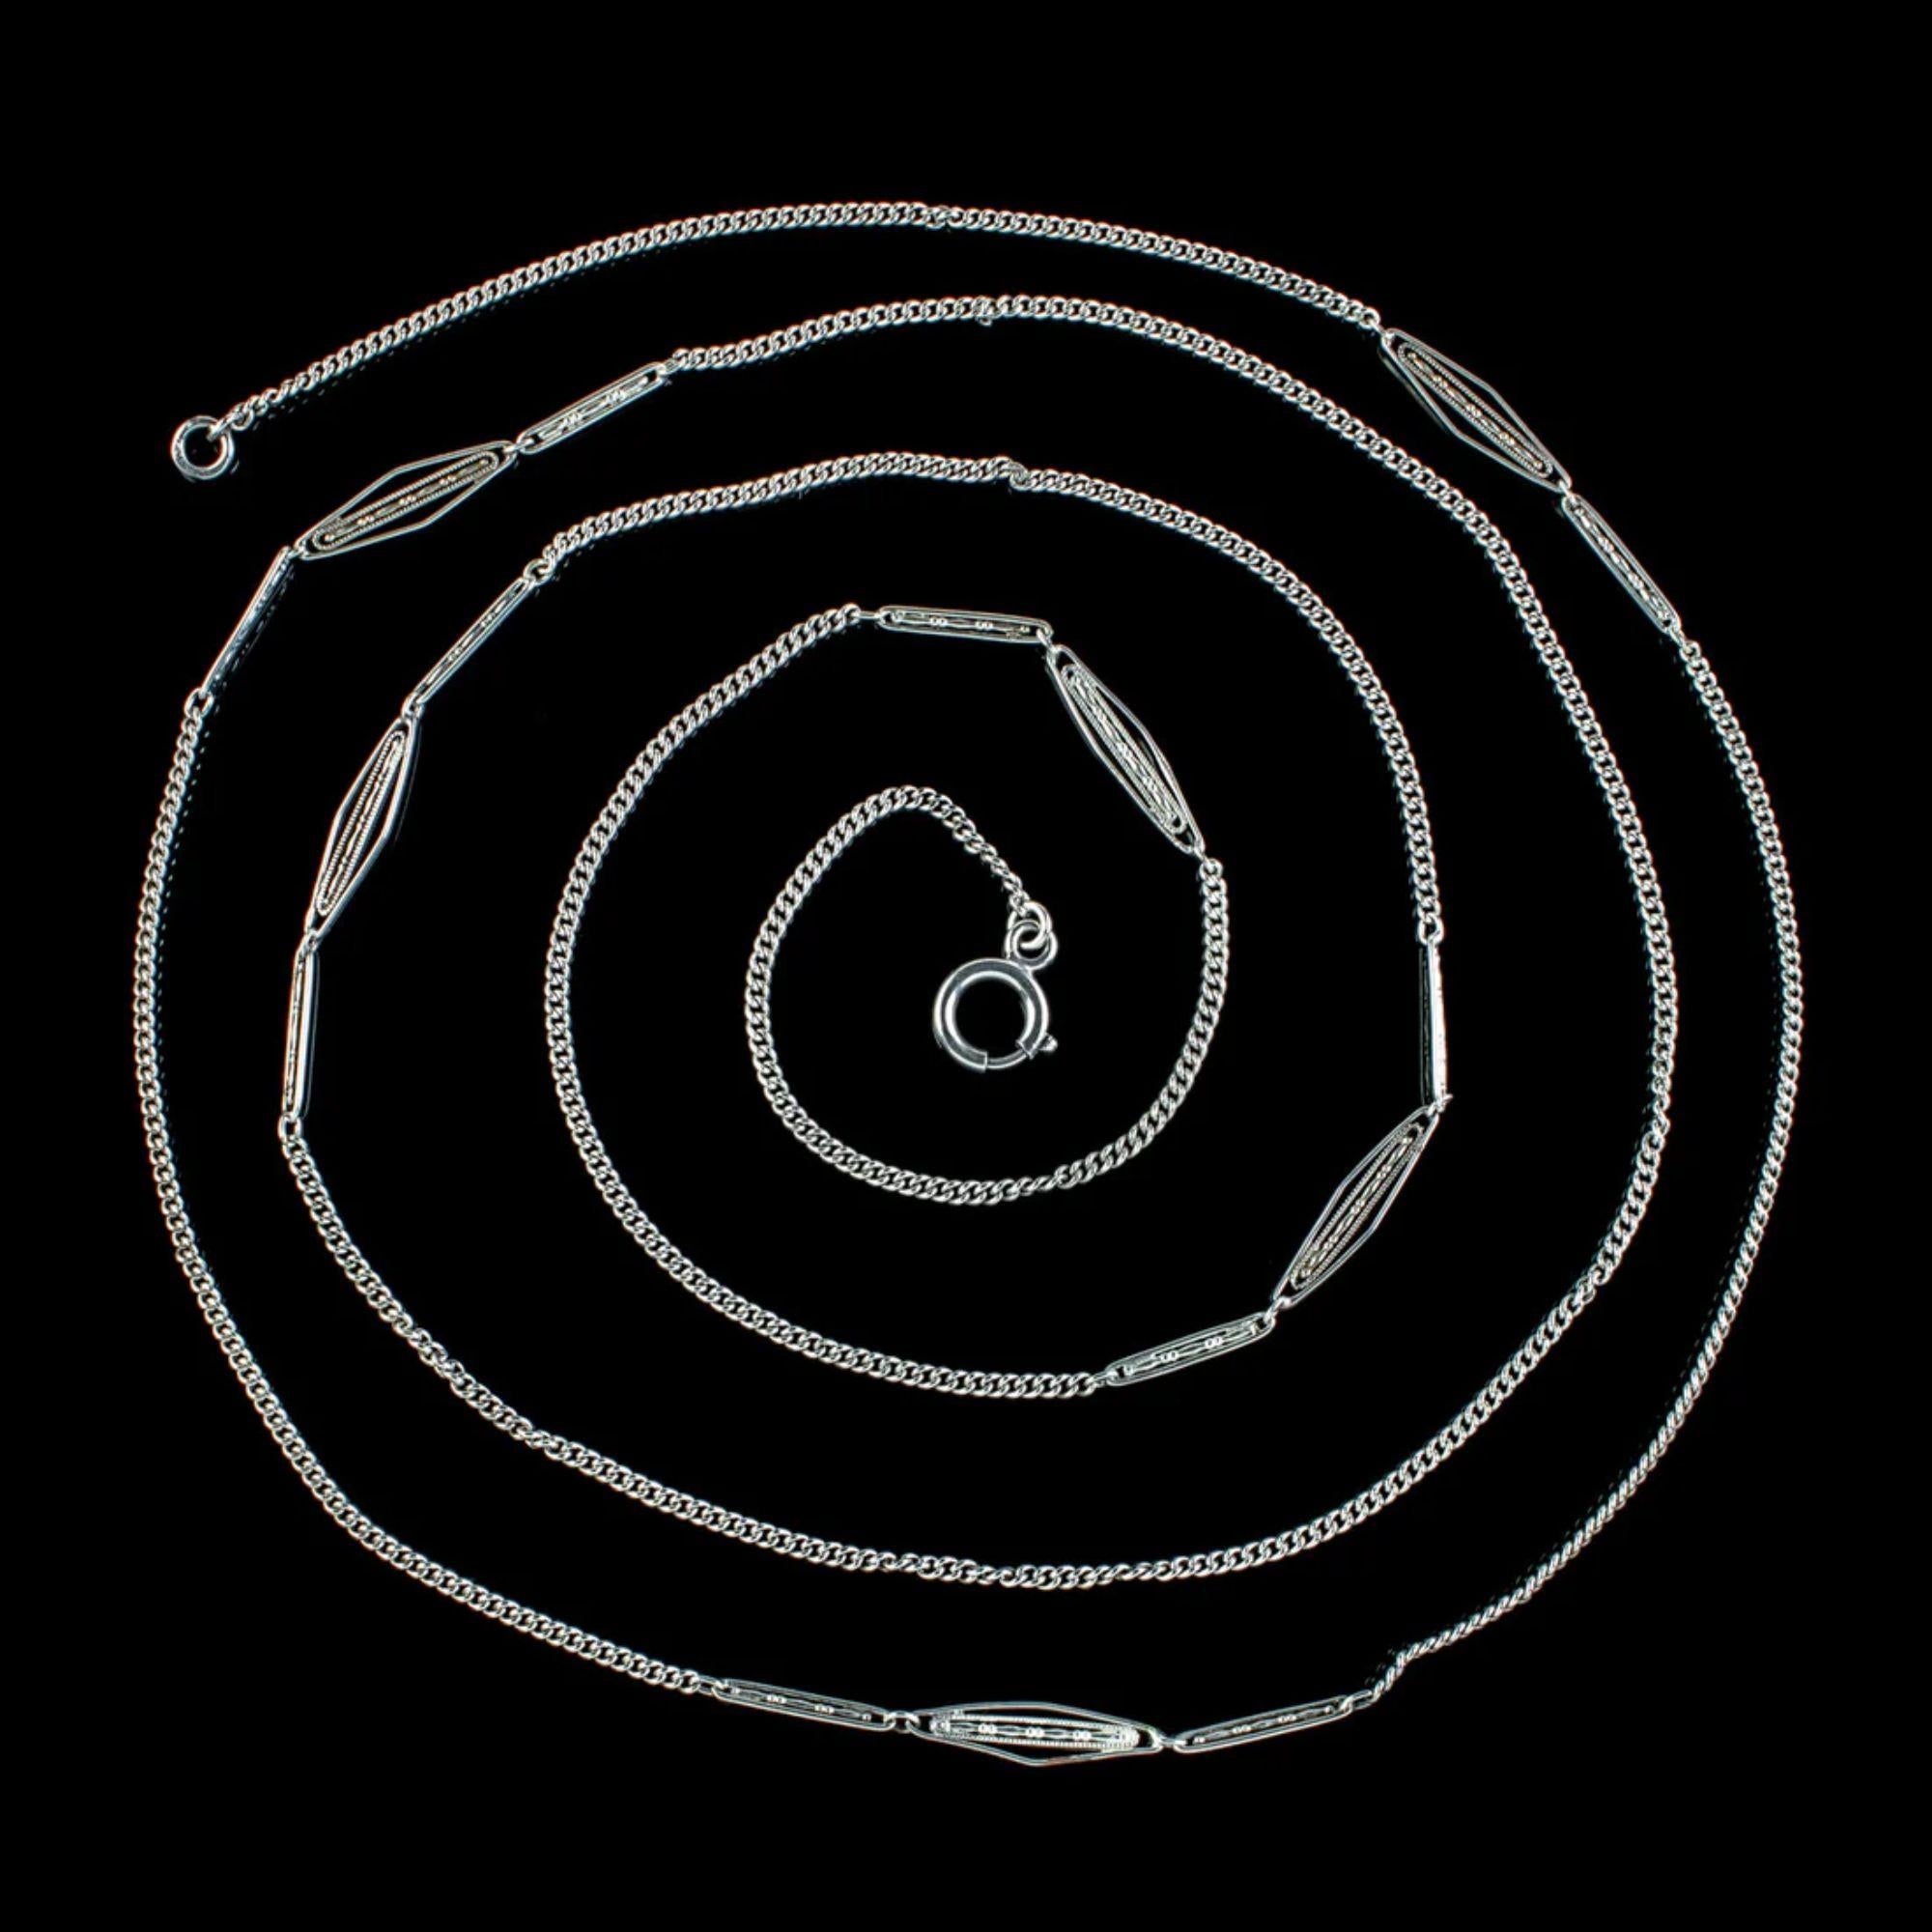 A stylish antique chain made by Mürrle Bennett & Co at the turn of the 20th Century. The silky chain consists of fine silver curb links with larger, open-work links along the length with decorative milgrain detailing.

Mürrle Bennett & Co was